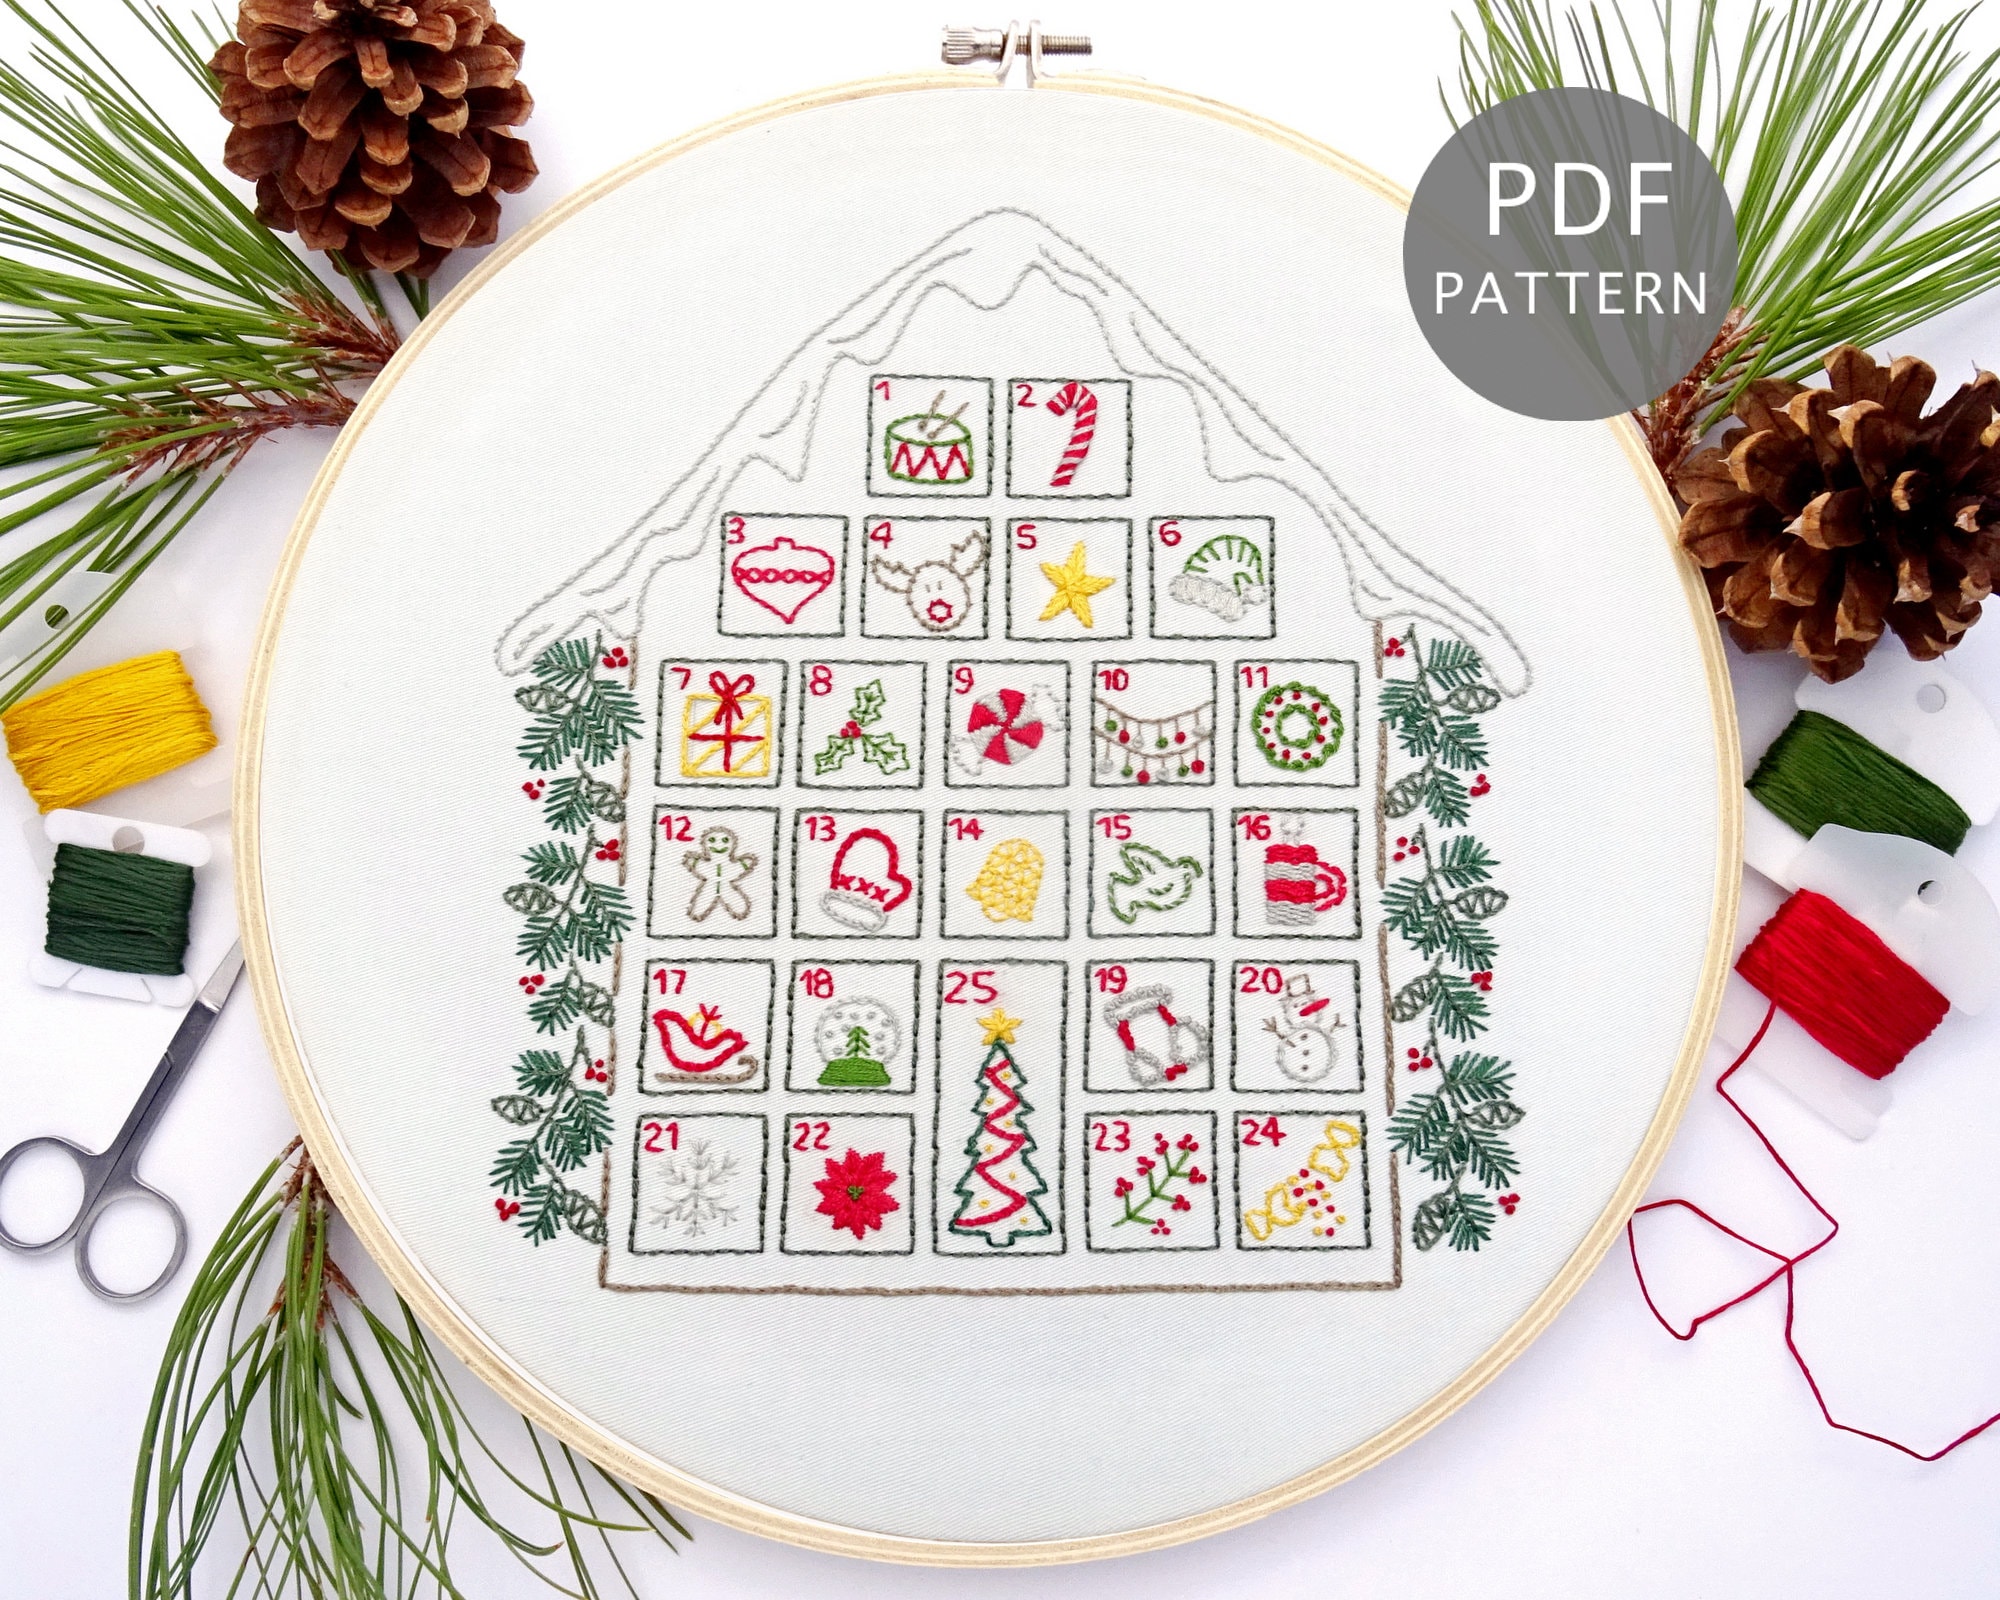 Advent Calendar Hand Embroidery Pattern, Stitch-a-day DIY Christmas Project  